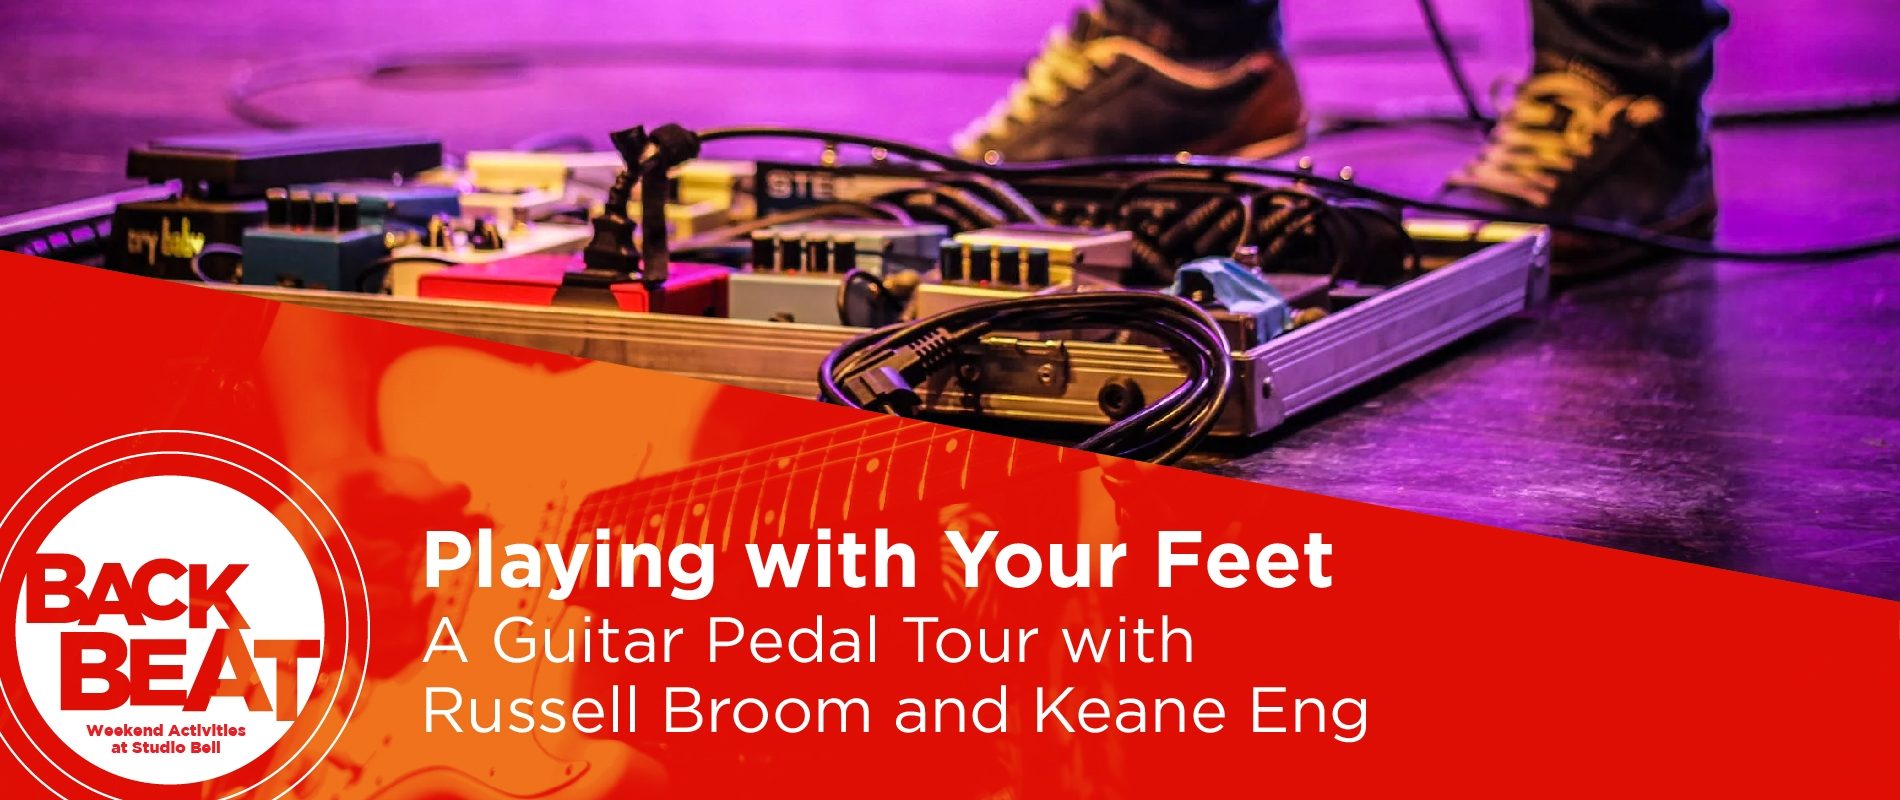 Playing with Your Feet: A Guitar Pedal Tour with Russell Broom and Keane Eng